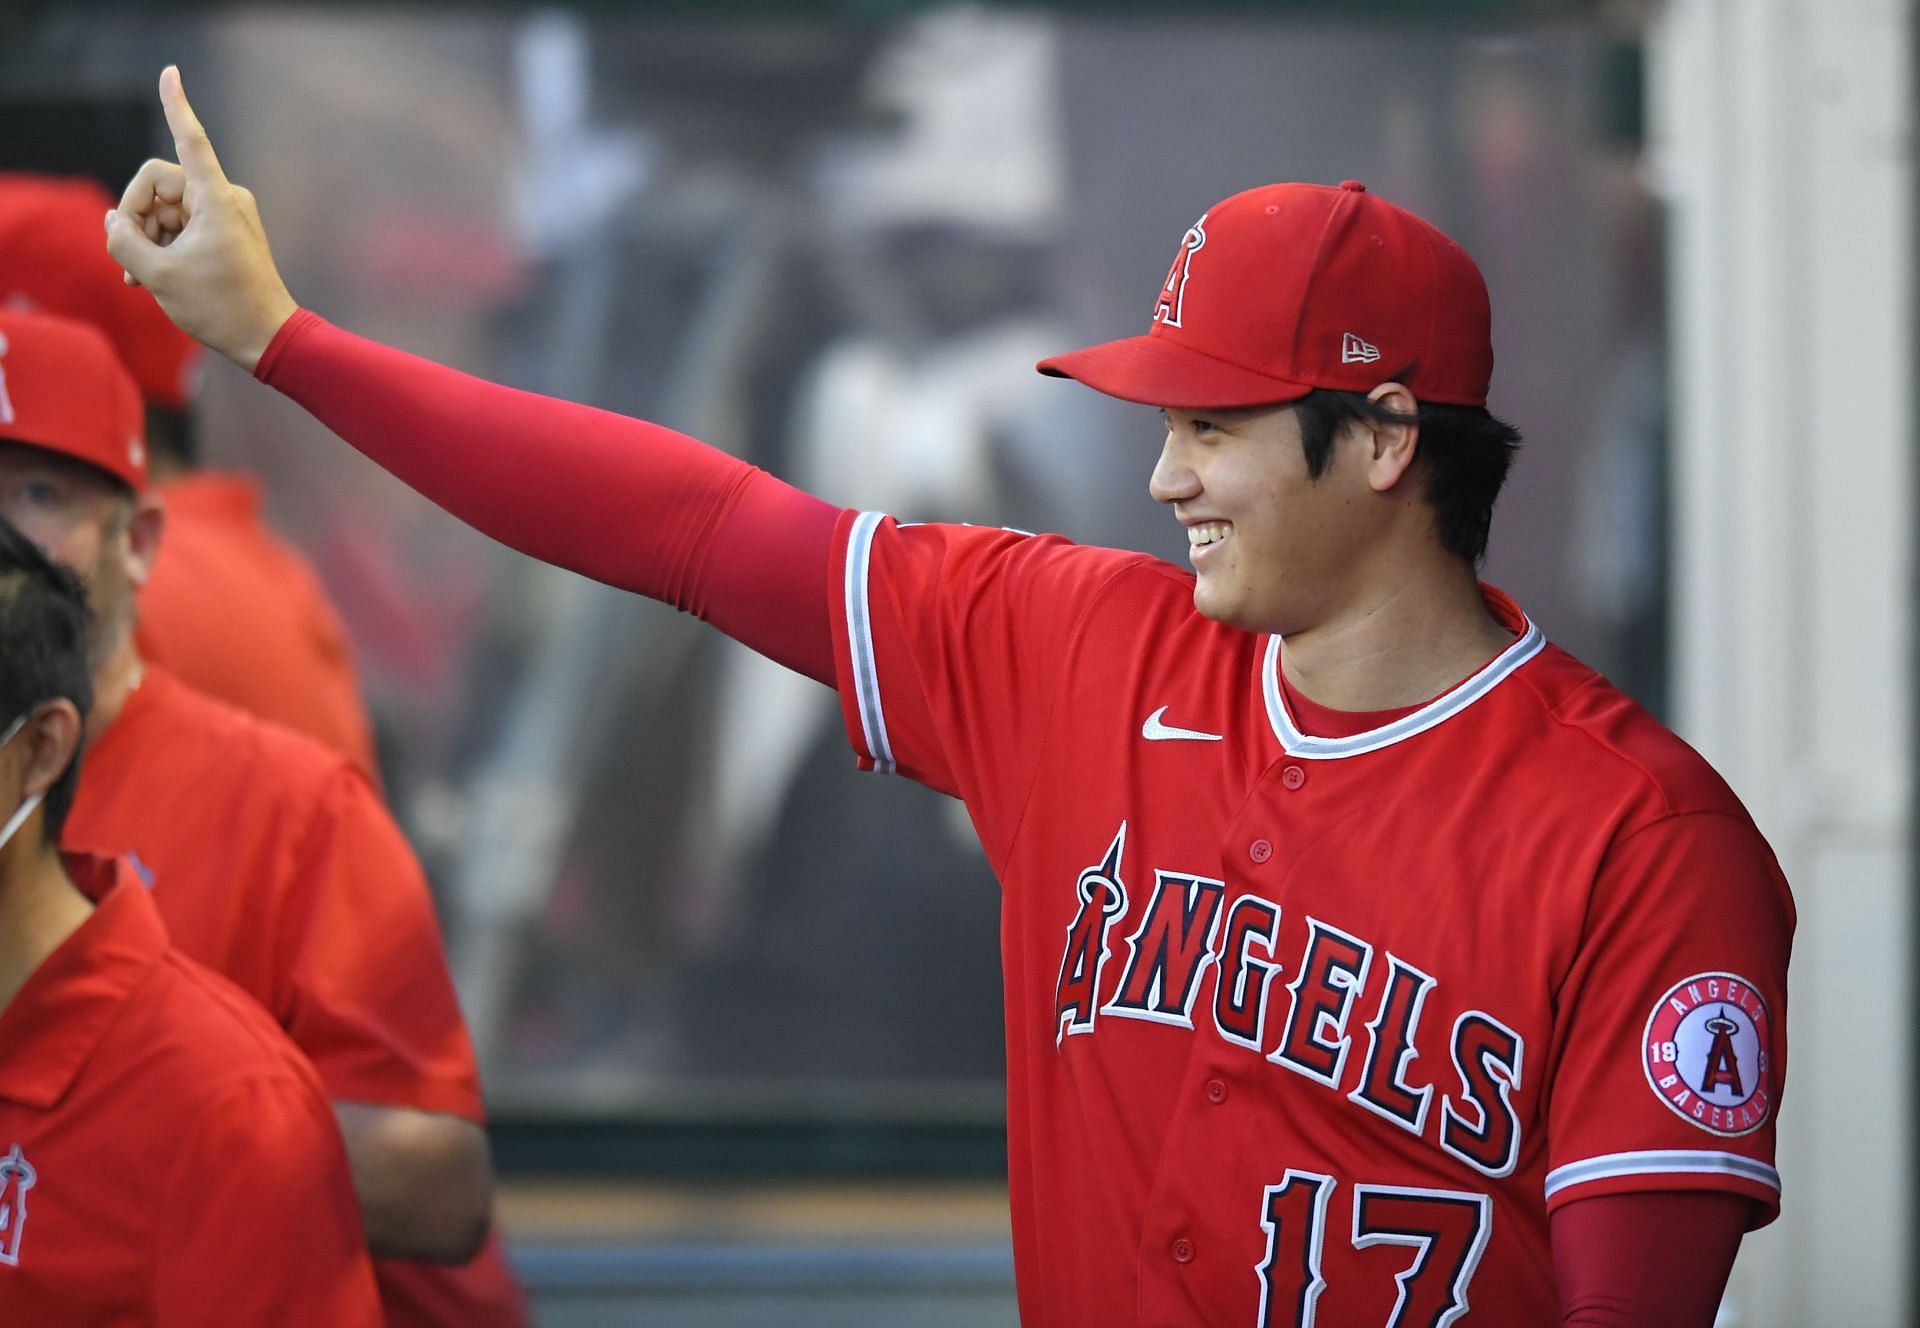 Miller: Shohei Ohtani brings a bat, an arm and much more to